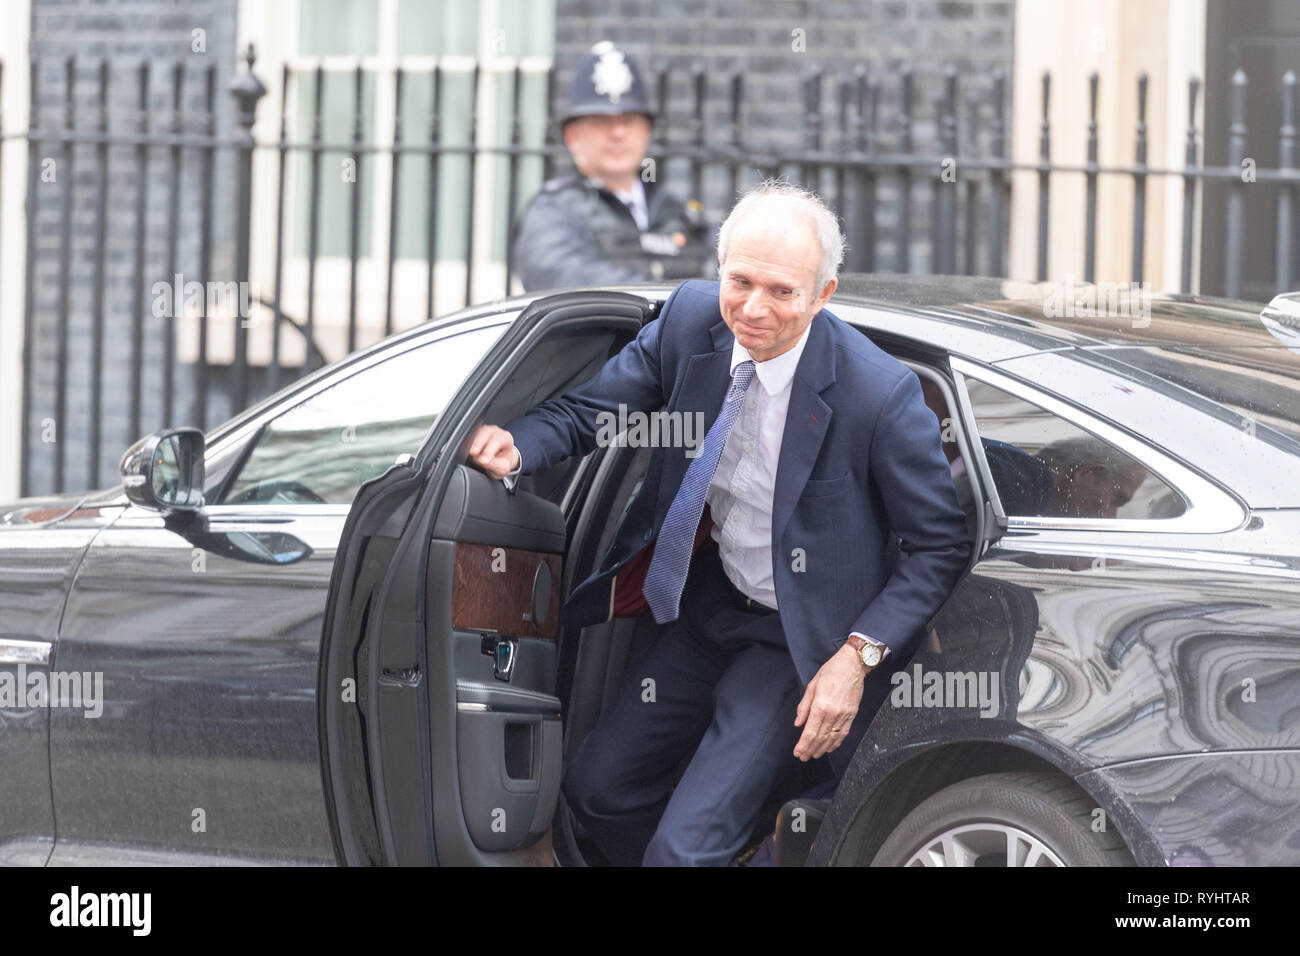 London, UK. 14th March 2019, David Lidinton MP PC, Cabinet minister arrives at a Cabinet meeting at 10 Downing Street, London, UK. Credit: Ian Davidson/Alamy Live News Stock Photo